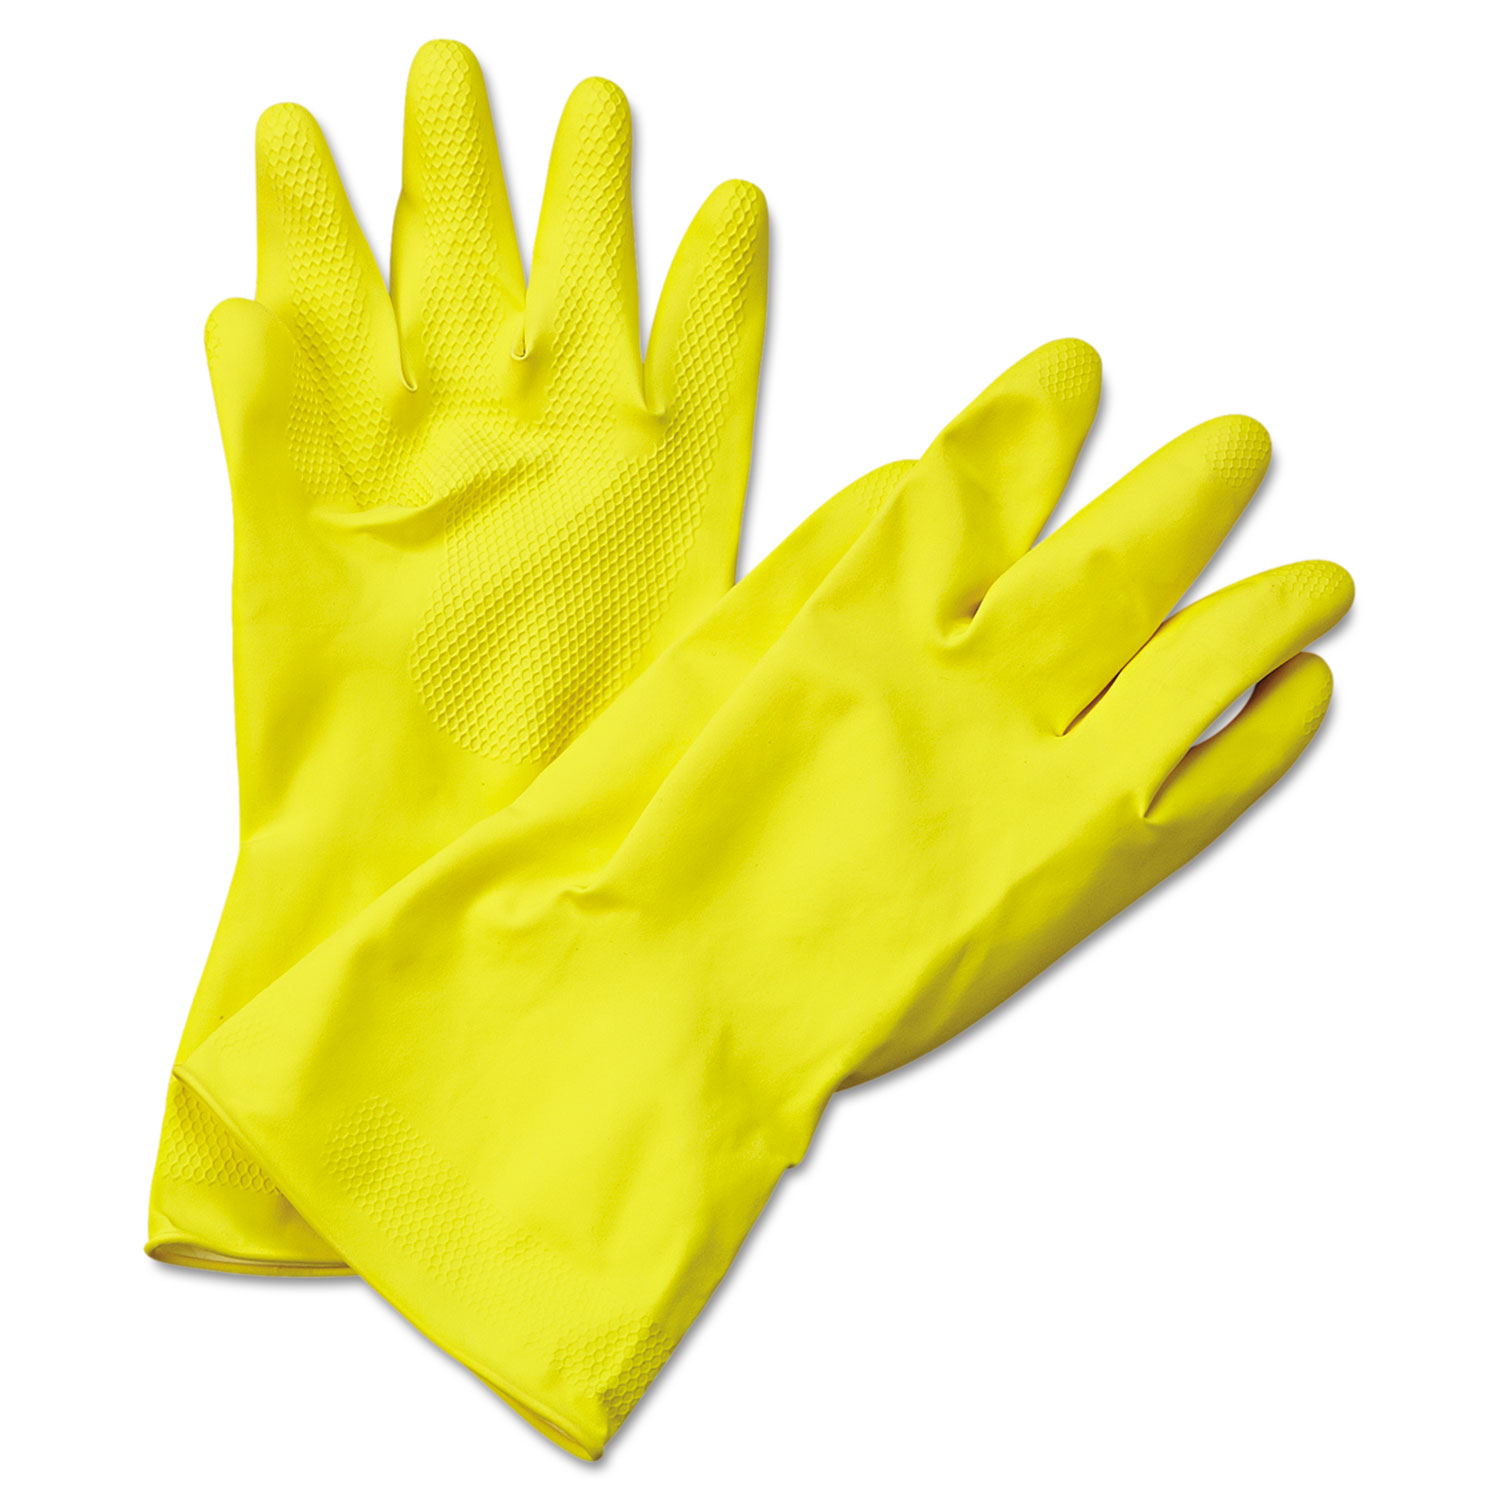  Boardwalk BWK242XL Flock-Lined Latex Cleaning Gloves, X-Large, Yellow, 12 Pairs (BWK242XL) 